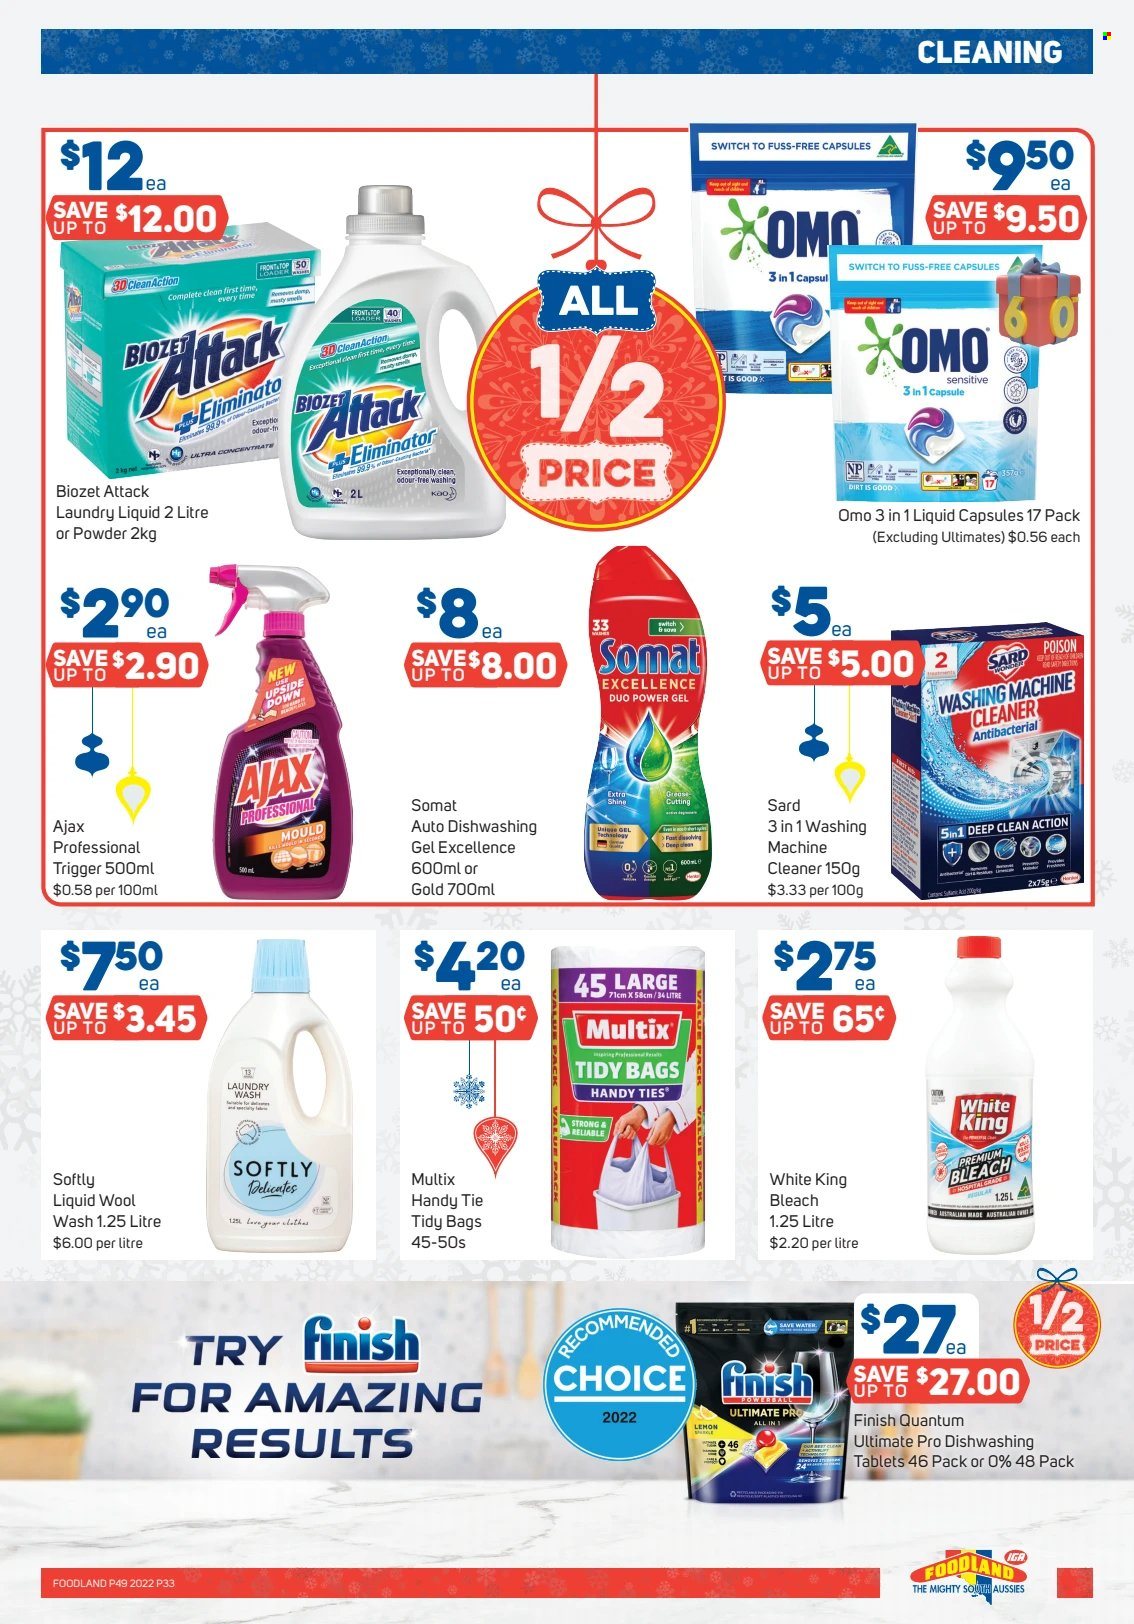 thumbnail - Foodland Catalogue - 7 Dec 2022 - 13 Dec 2022 - Sales products - cleaner, bleach, washing machine cleaner, Ajax, Omo, laundry detergent, Finish Powerball, Finish Quantum Ultimate, bag. Page 33.